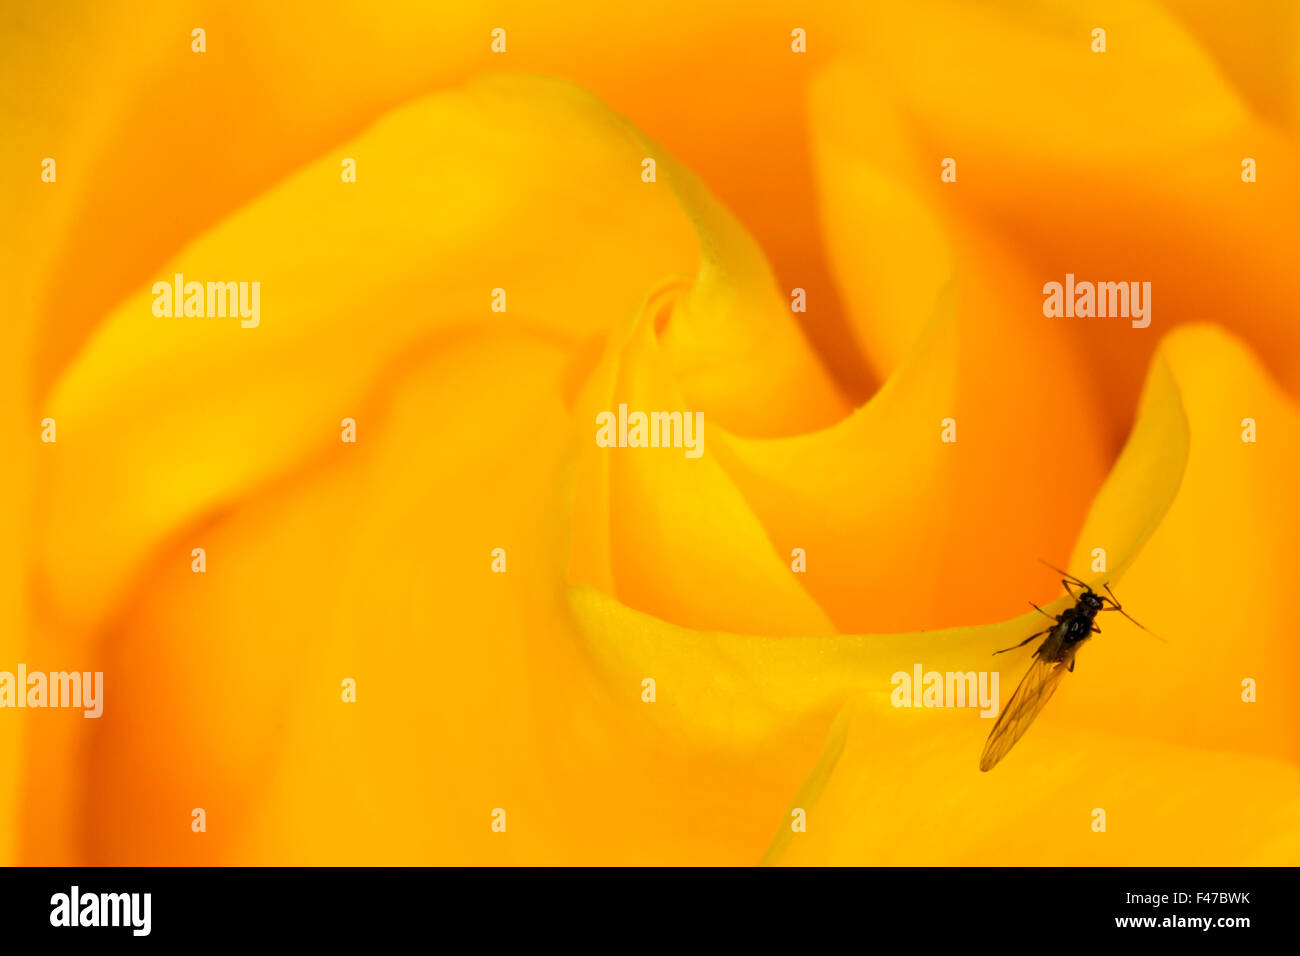 A close-up of a green fly on a yellow rose, Sweden. Stock Photo